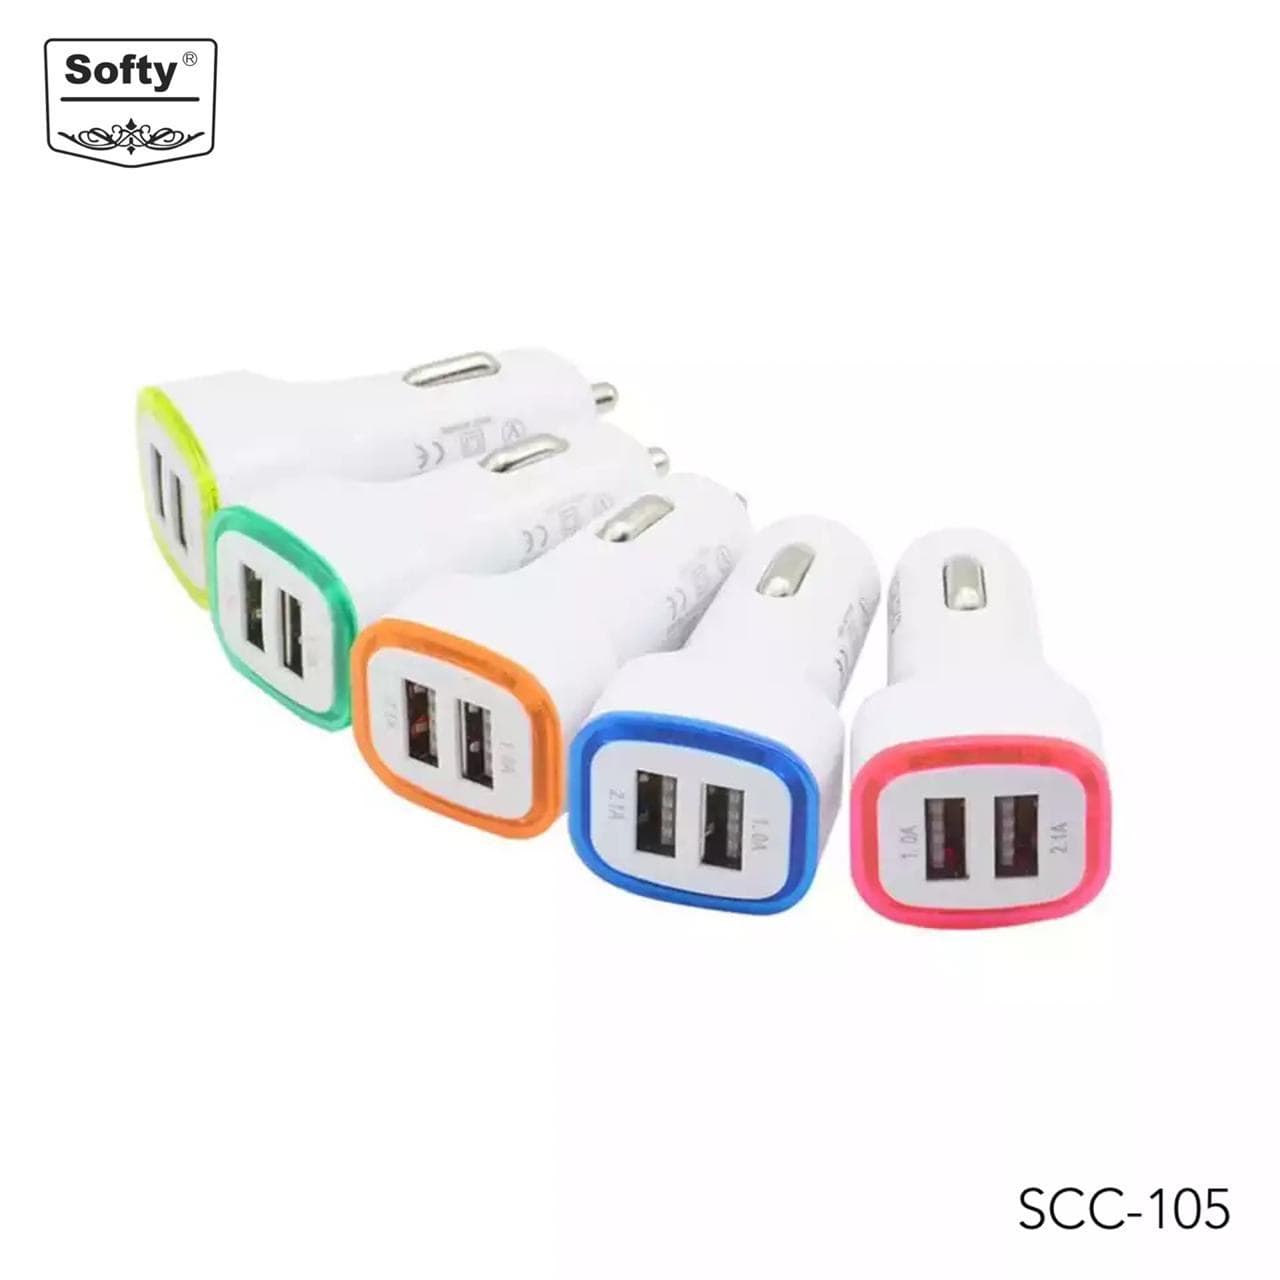 Softy premium quality 2.1amp Dual USB car charger-USB CAR CHARGERS-dealsplant